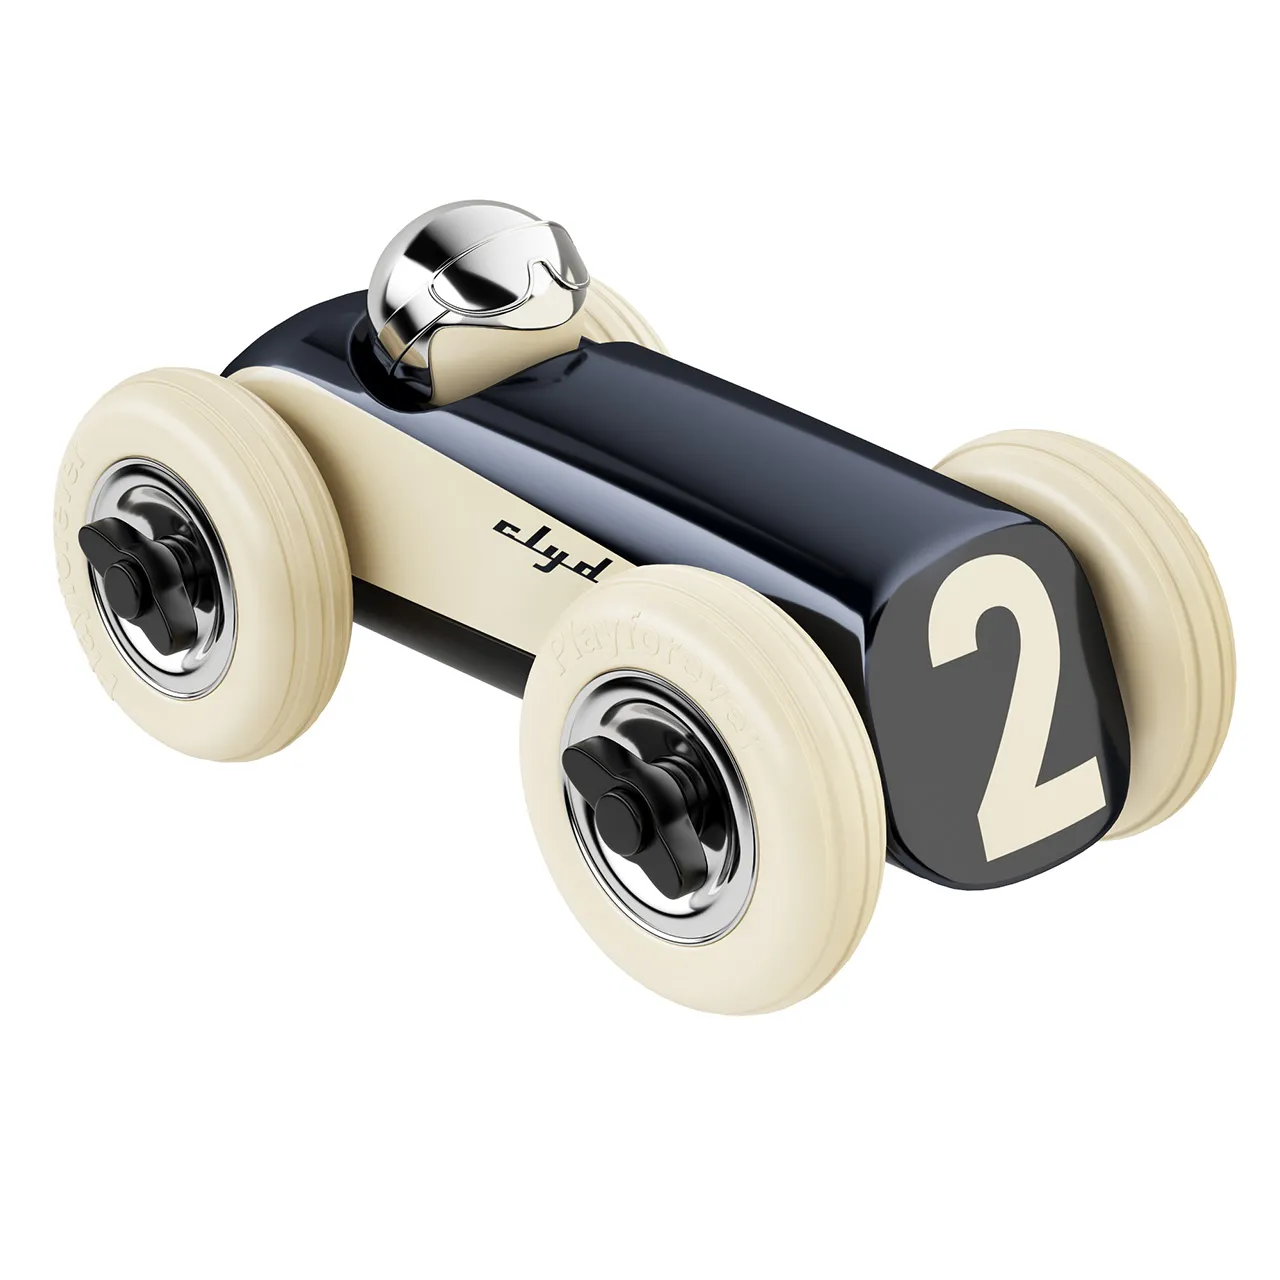 Kids – 502-clyde-midnight-toy-car-by-playforever